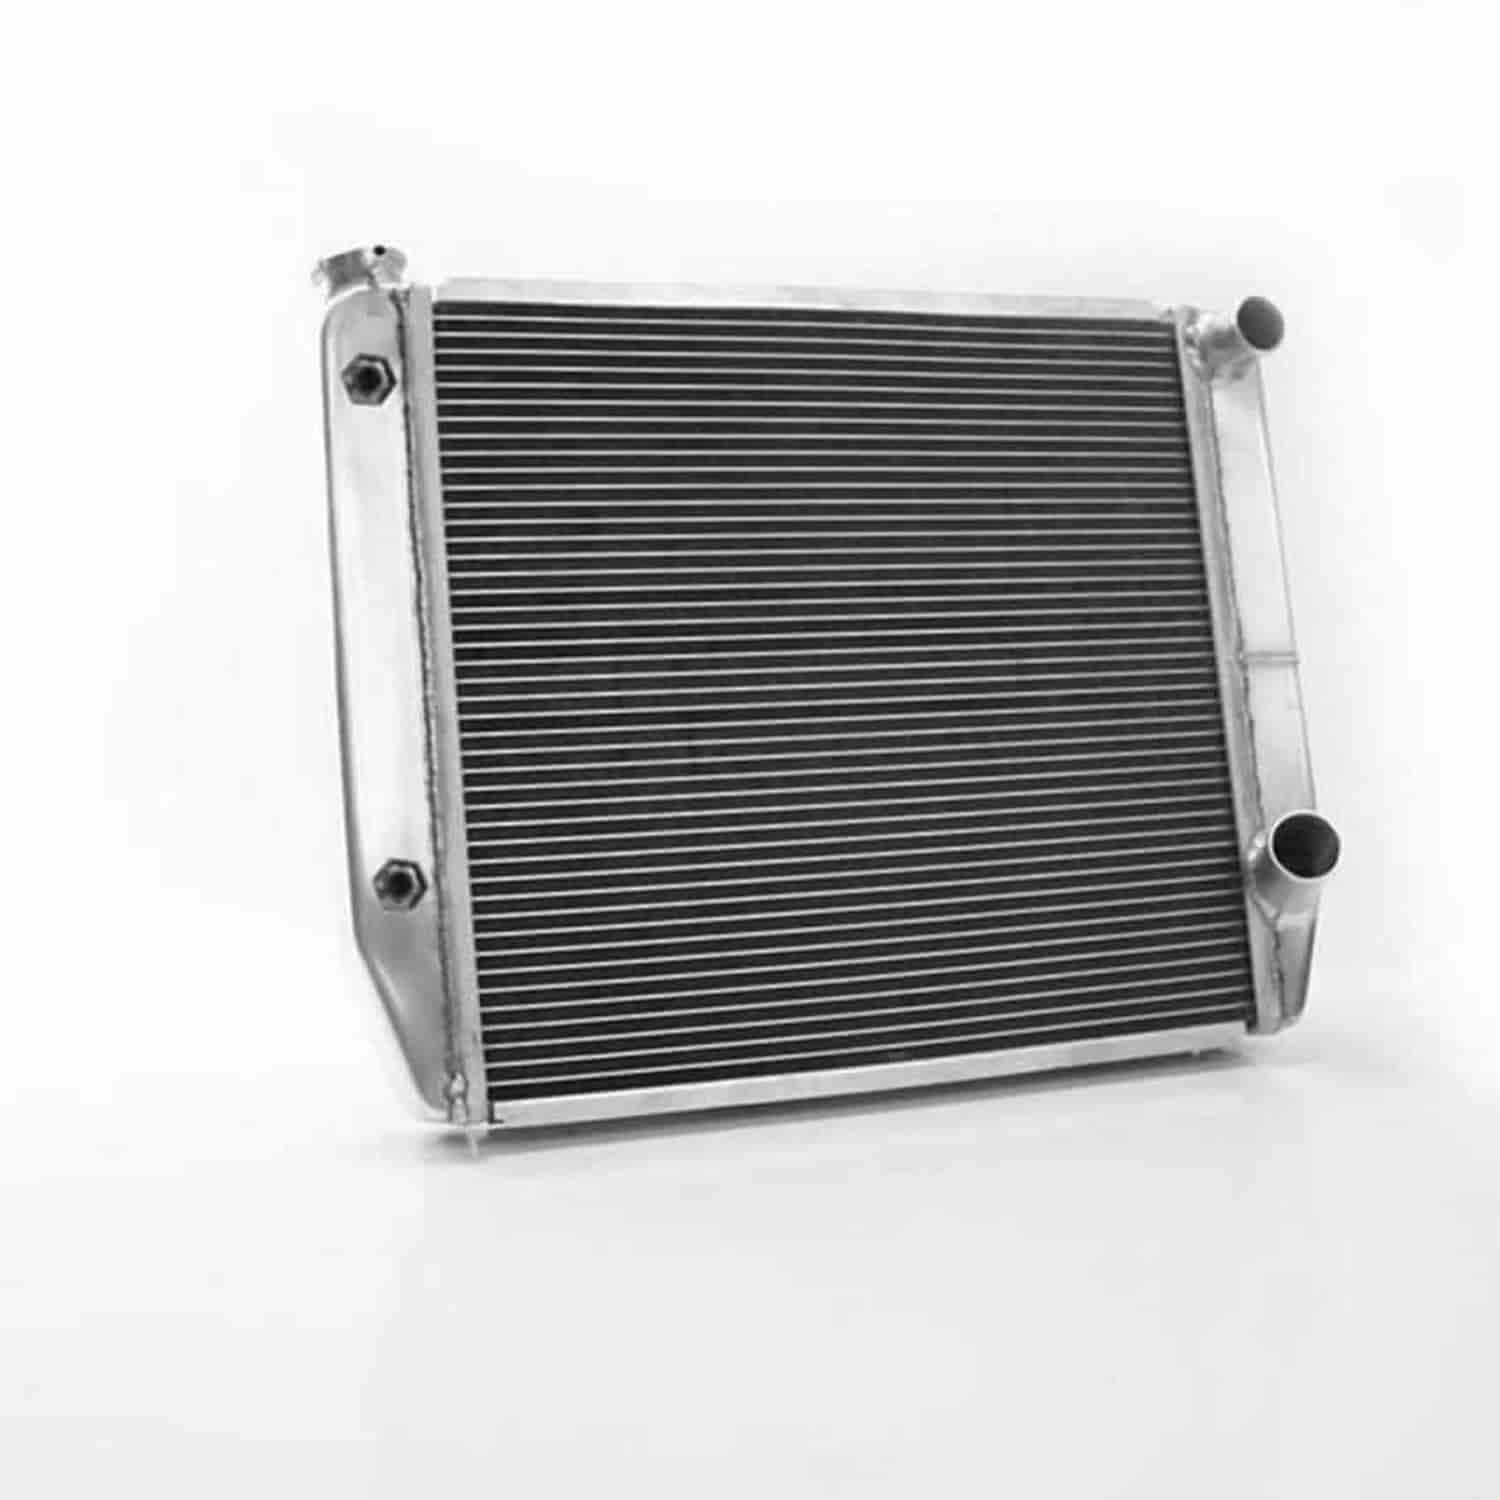 MegaCool Universal Fit Radiator Dual Pass Crossflow Design 24" x 19" with Transmission Cooler